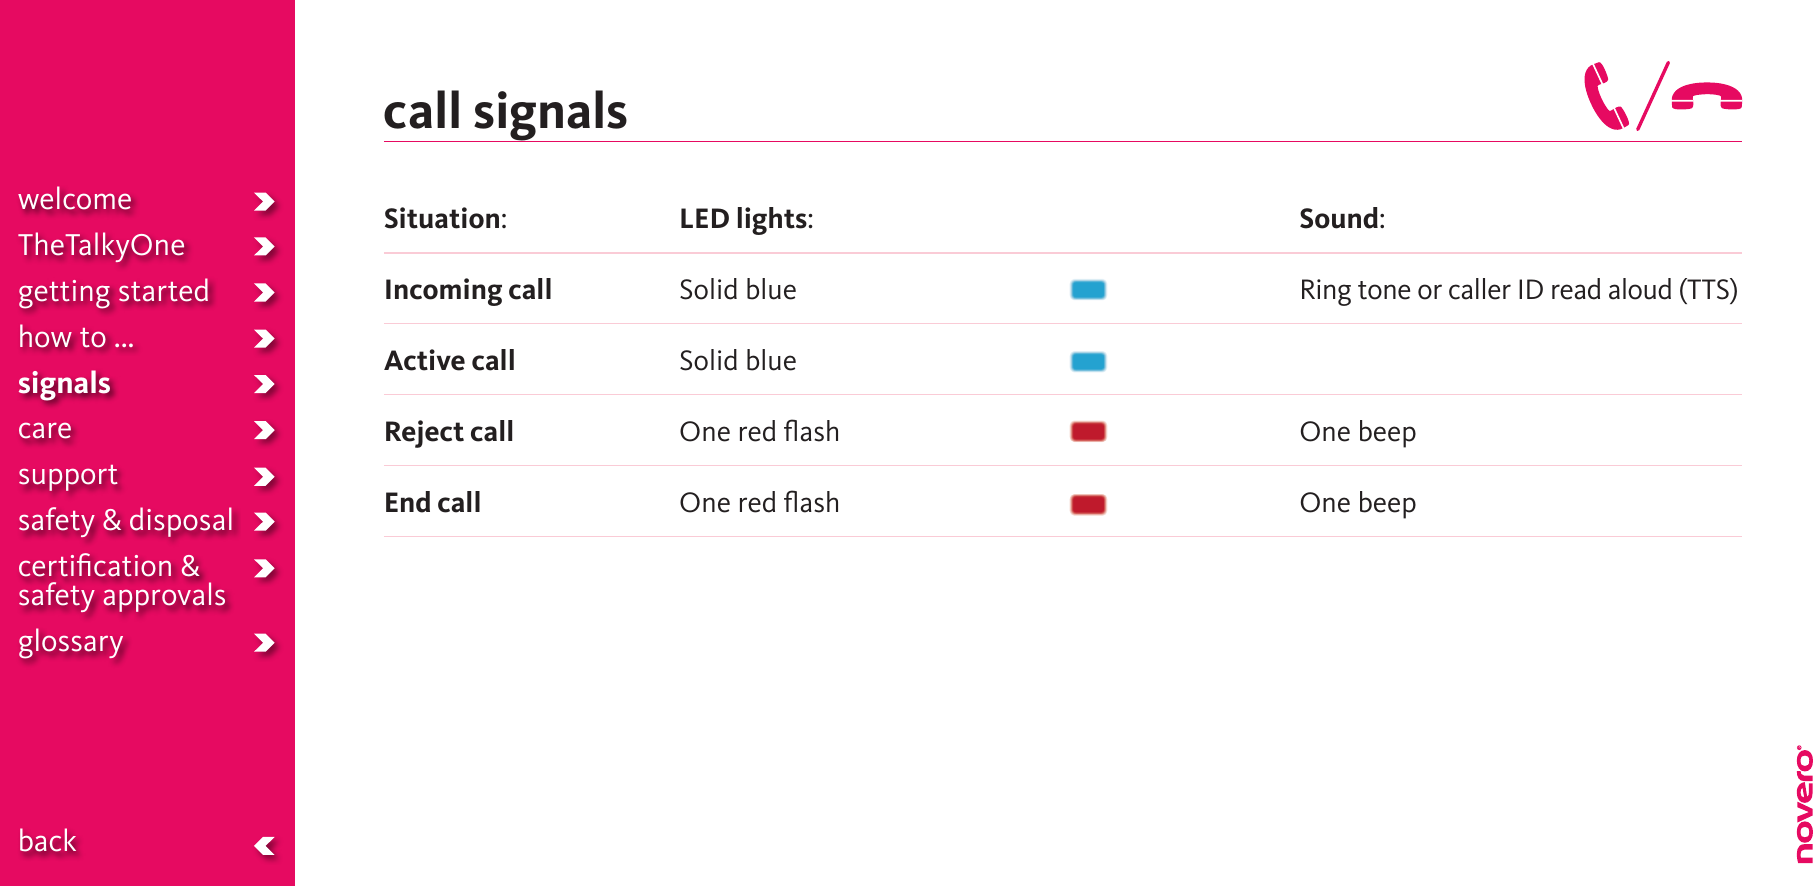 call signalsSituation:Incoming callActive callReject callEnd callSound: Ring tone or caller ID read aloud (TTS)One beepOne beepLED lights:Solid blueSolid blueOne red ﬂashOne red ﬂashwelcomeTheTalkyOnegetting startedhow to ...signalscaresupportsafety &amp; disposalcertiﬁcation &amp;  safety approvals glossary  back